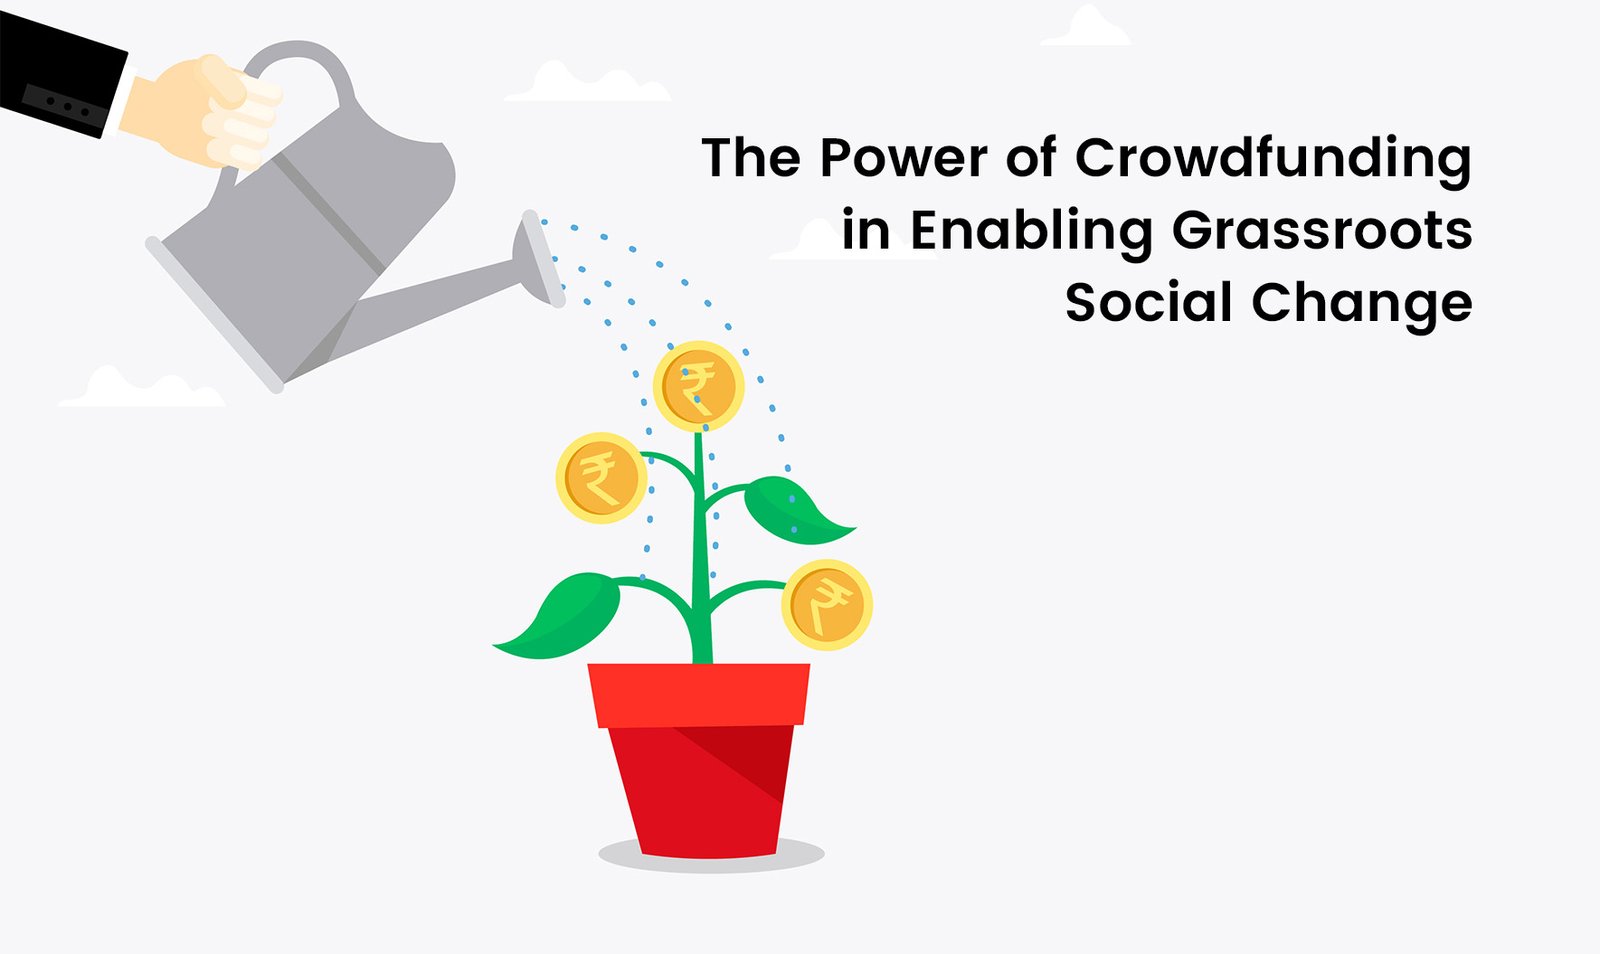 The Power of Crowdfunding in Enabling Grassroots Social Change